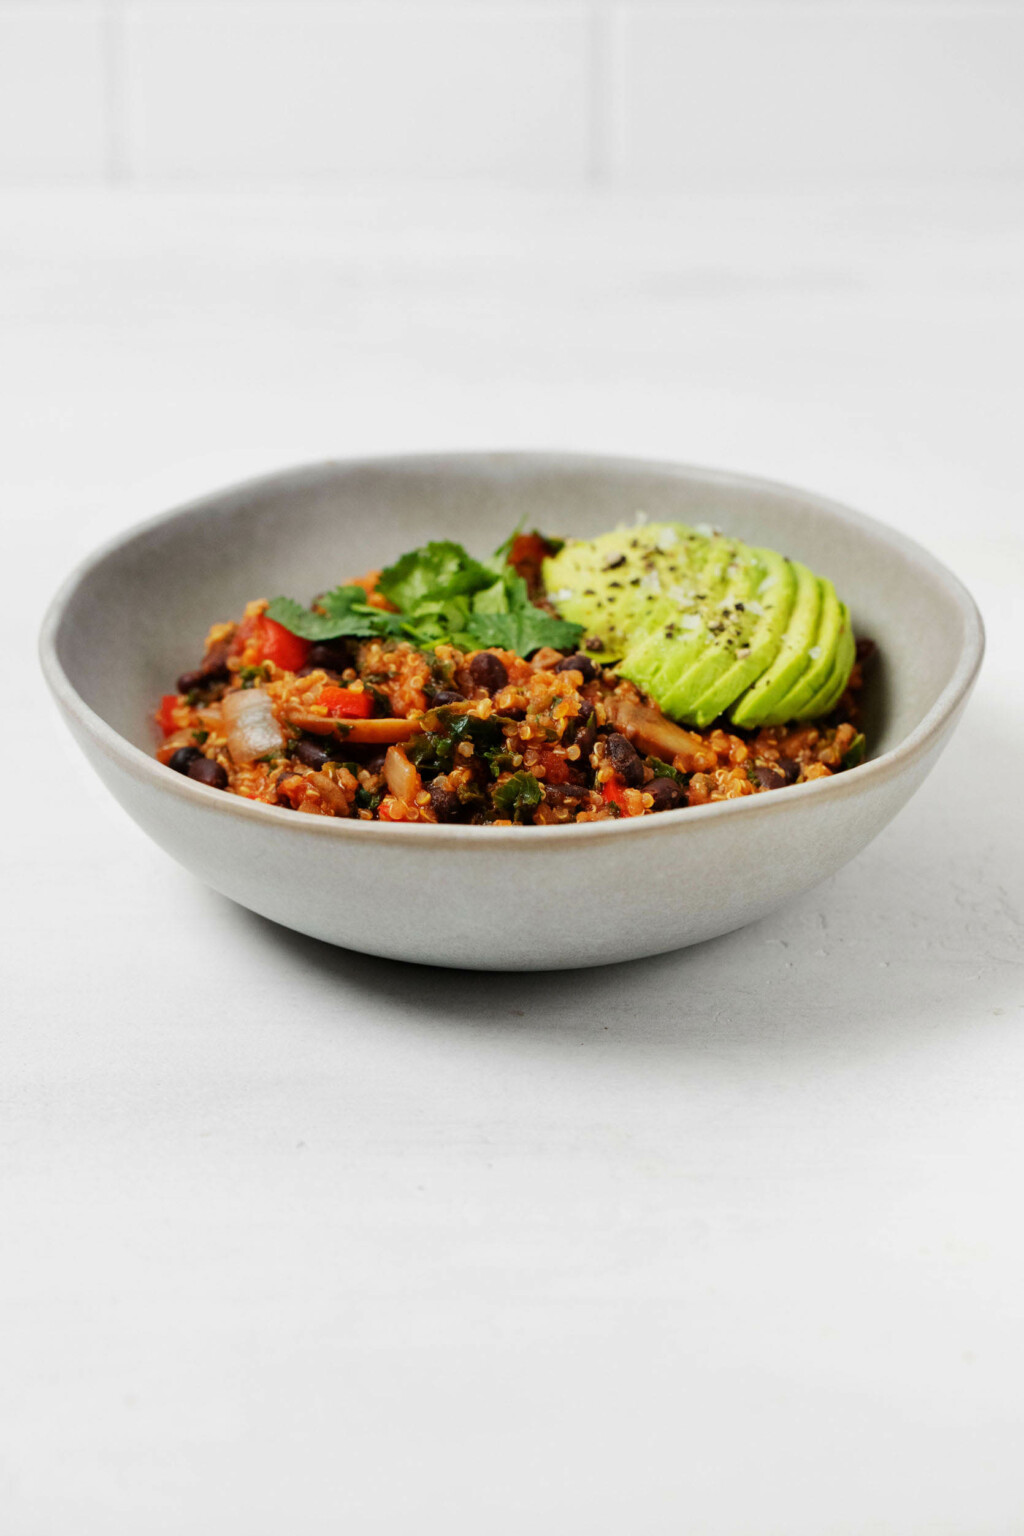 A light gray bowl holds a quinoa black bean chili. It's garnished with avocado slices and chopped herbs.